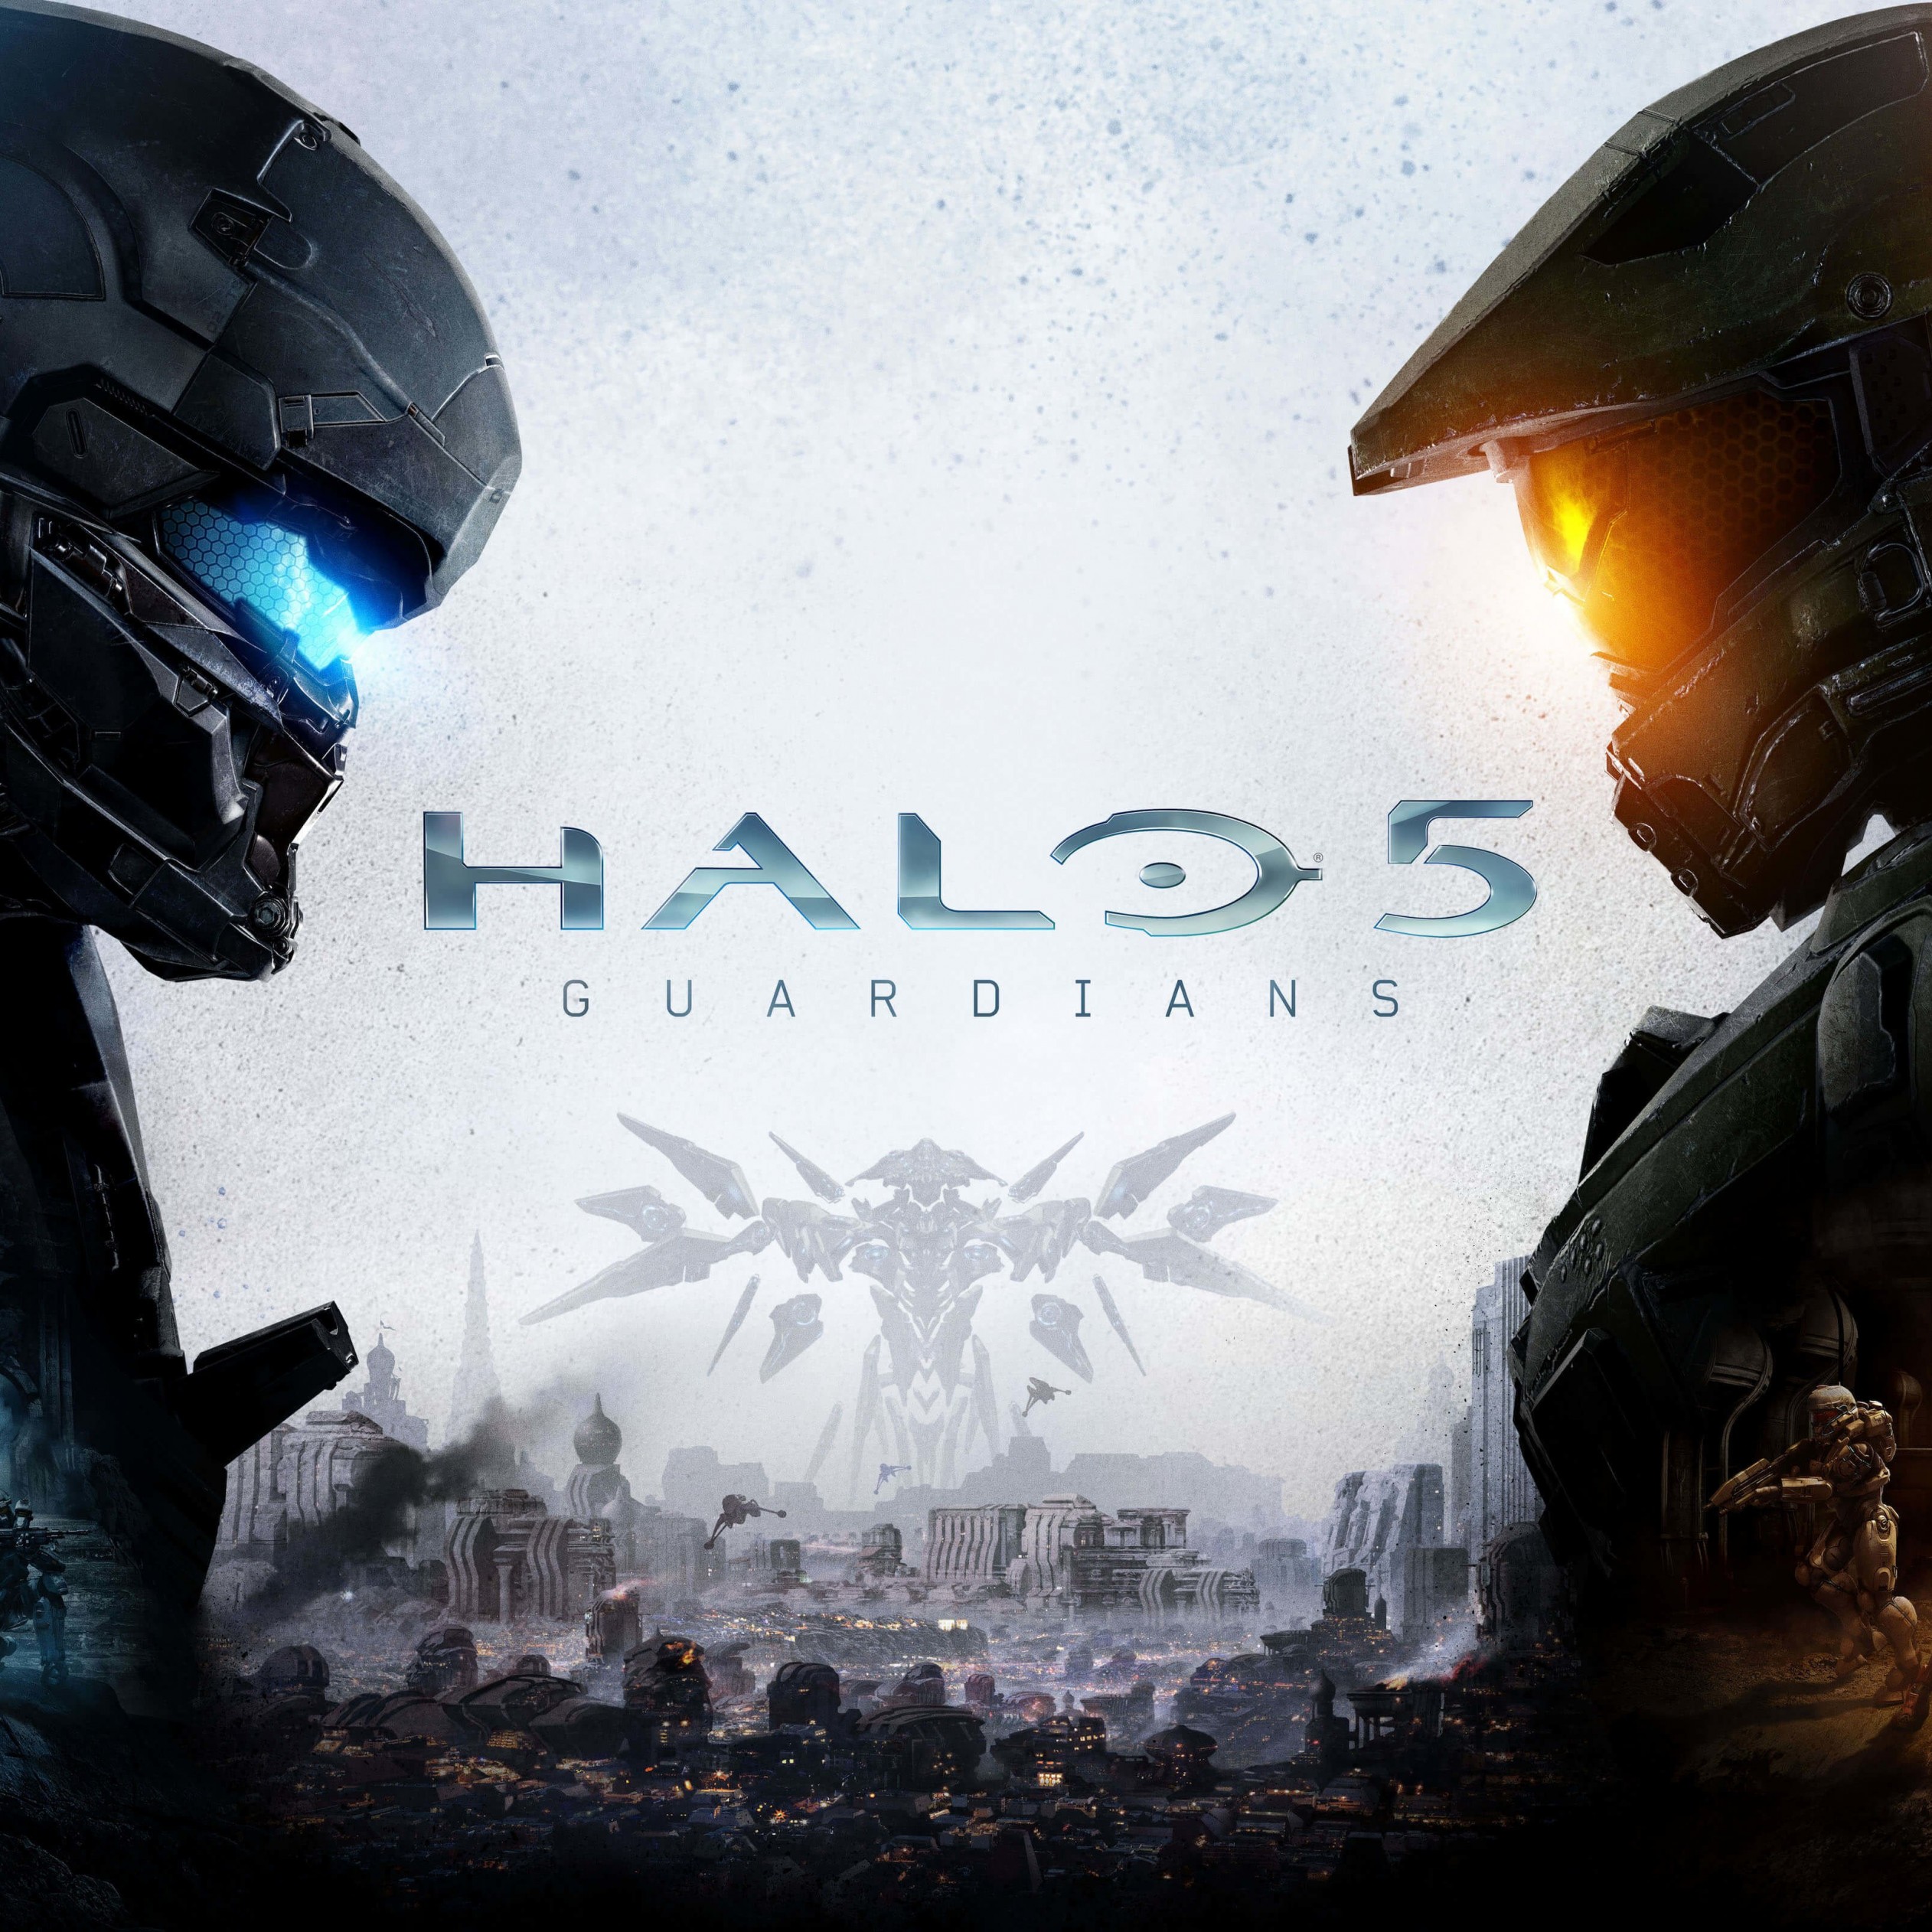 Halo 5: Guardians Wallpaper for Apple iPad Air